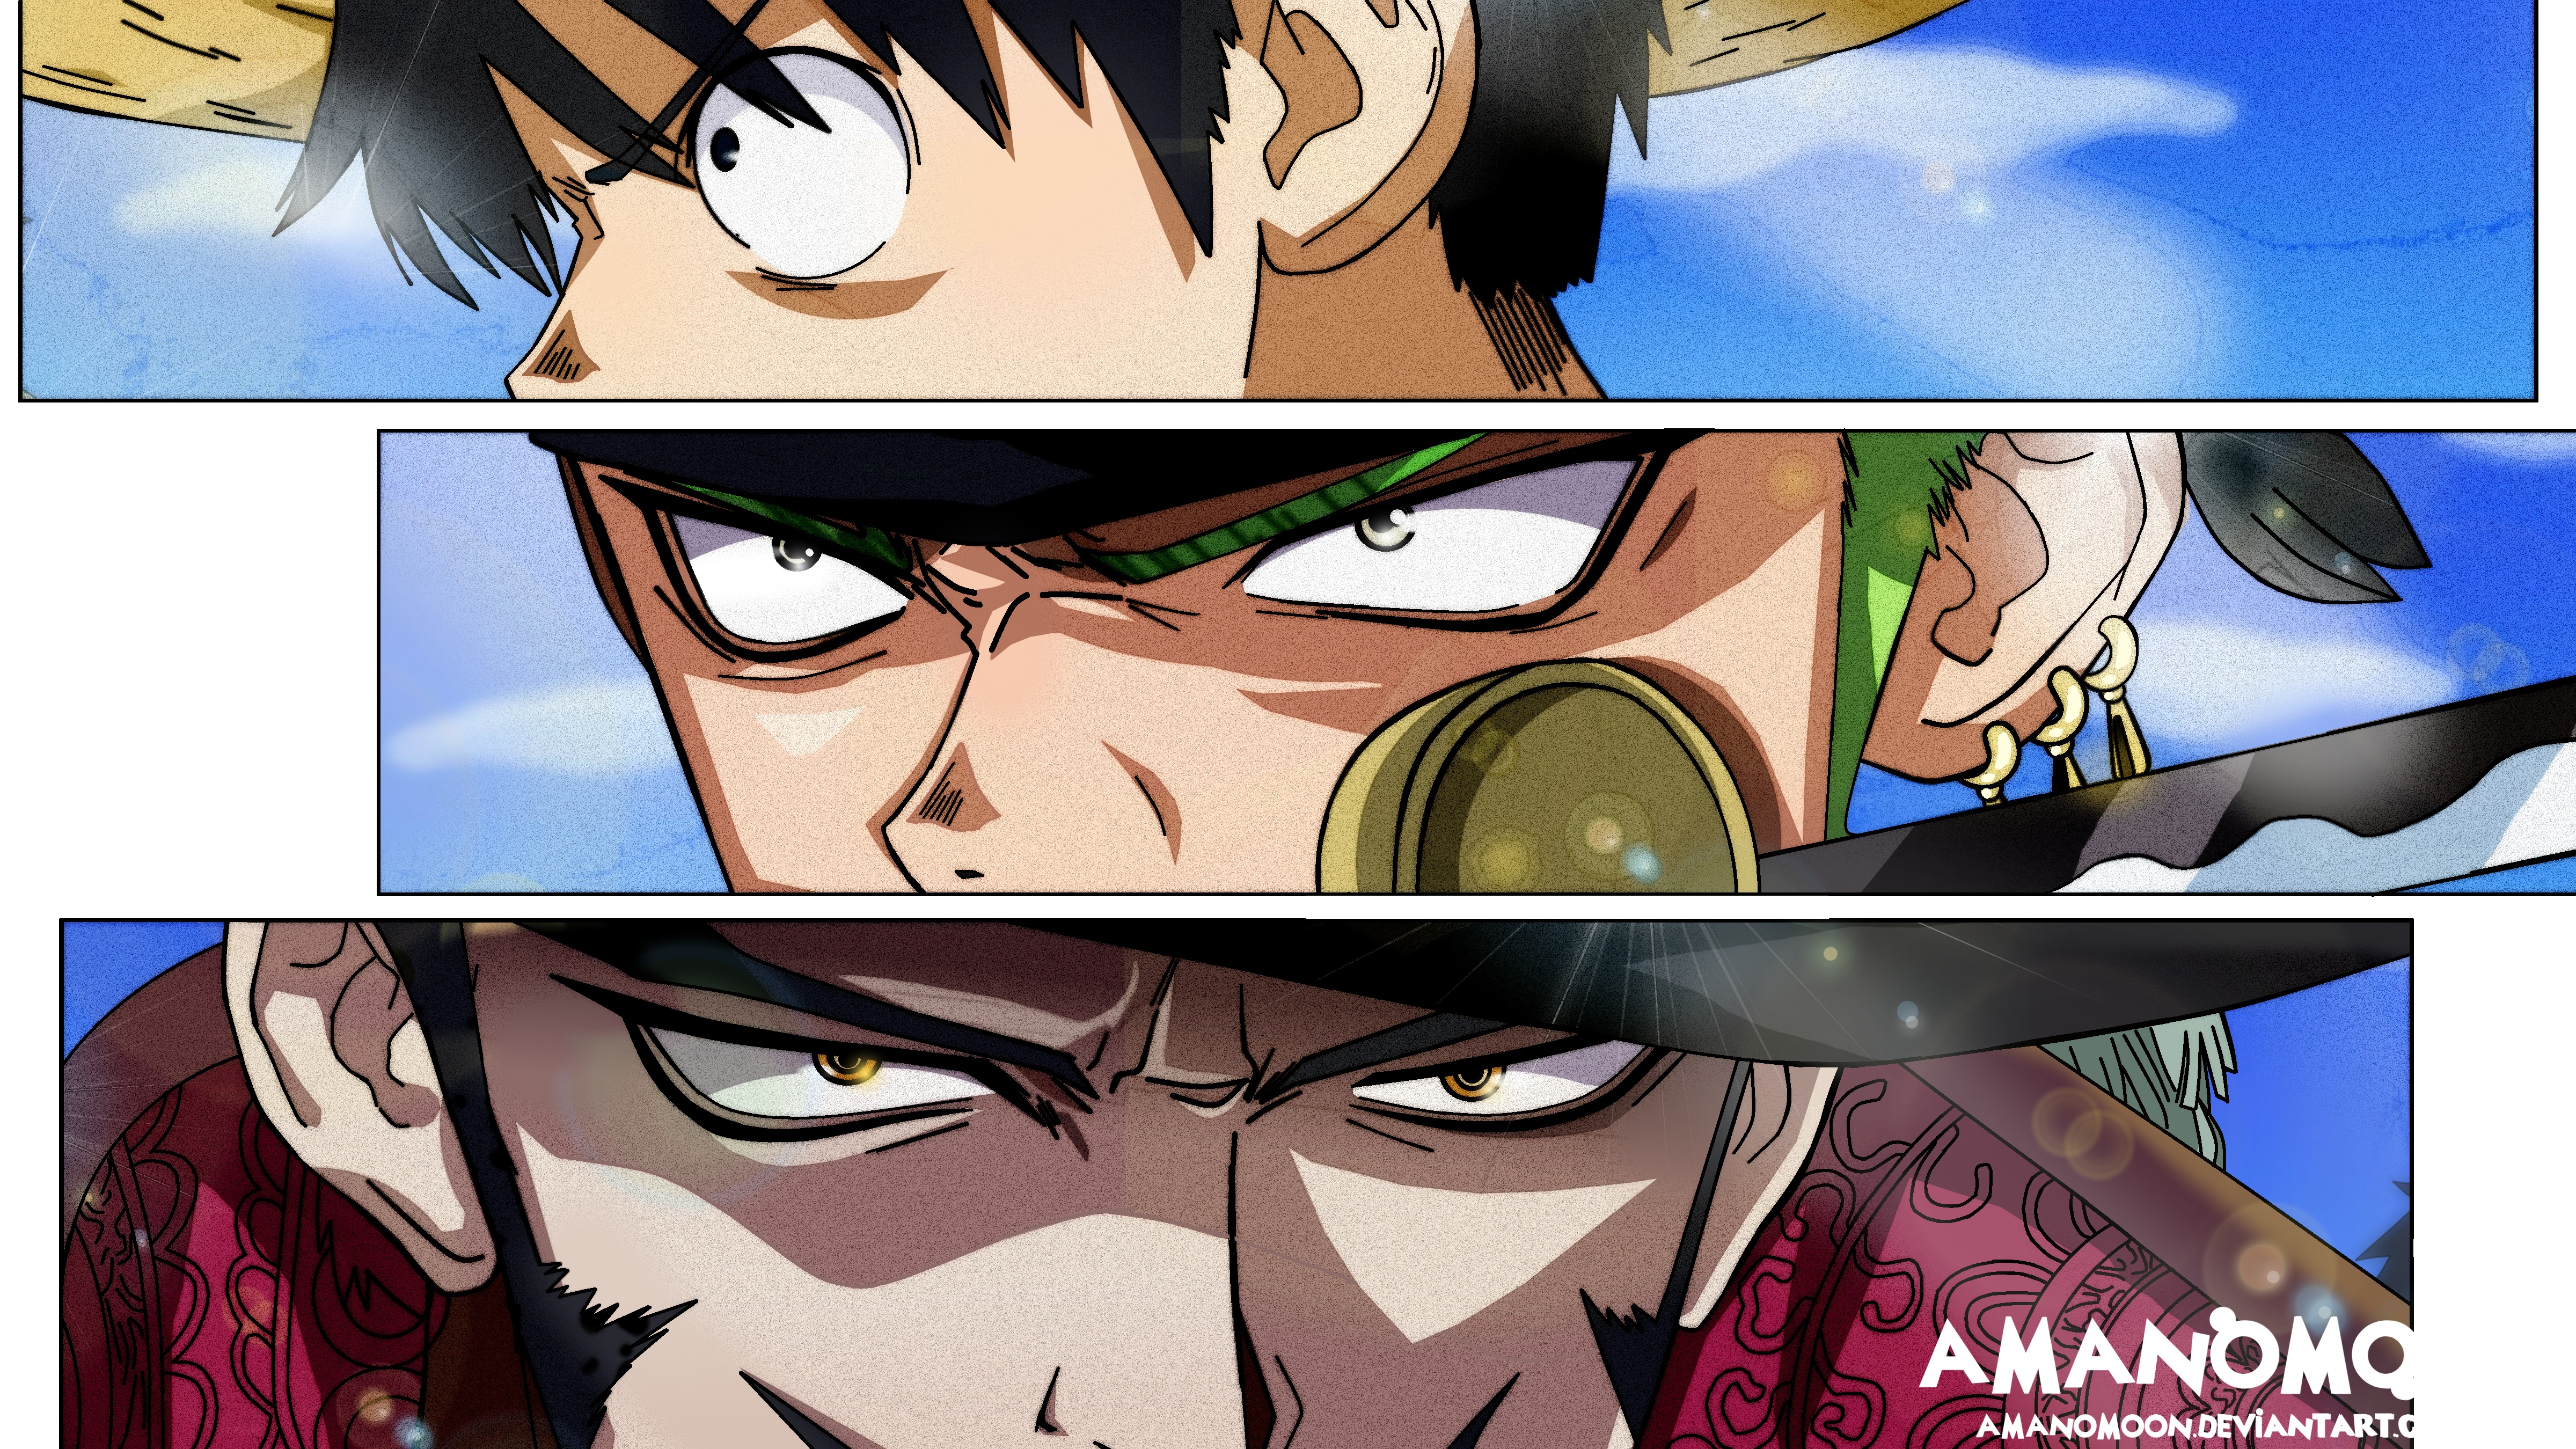 Anime One Piece 8k Ultra HD Wallpaper by Amanomoon